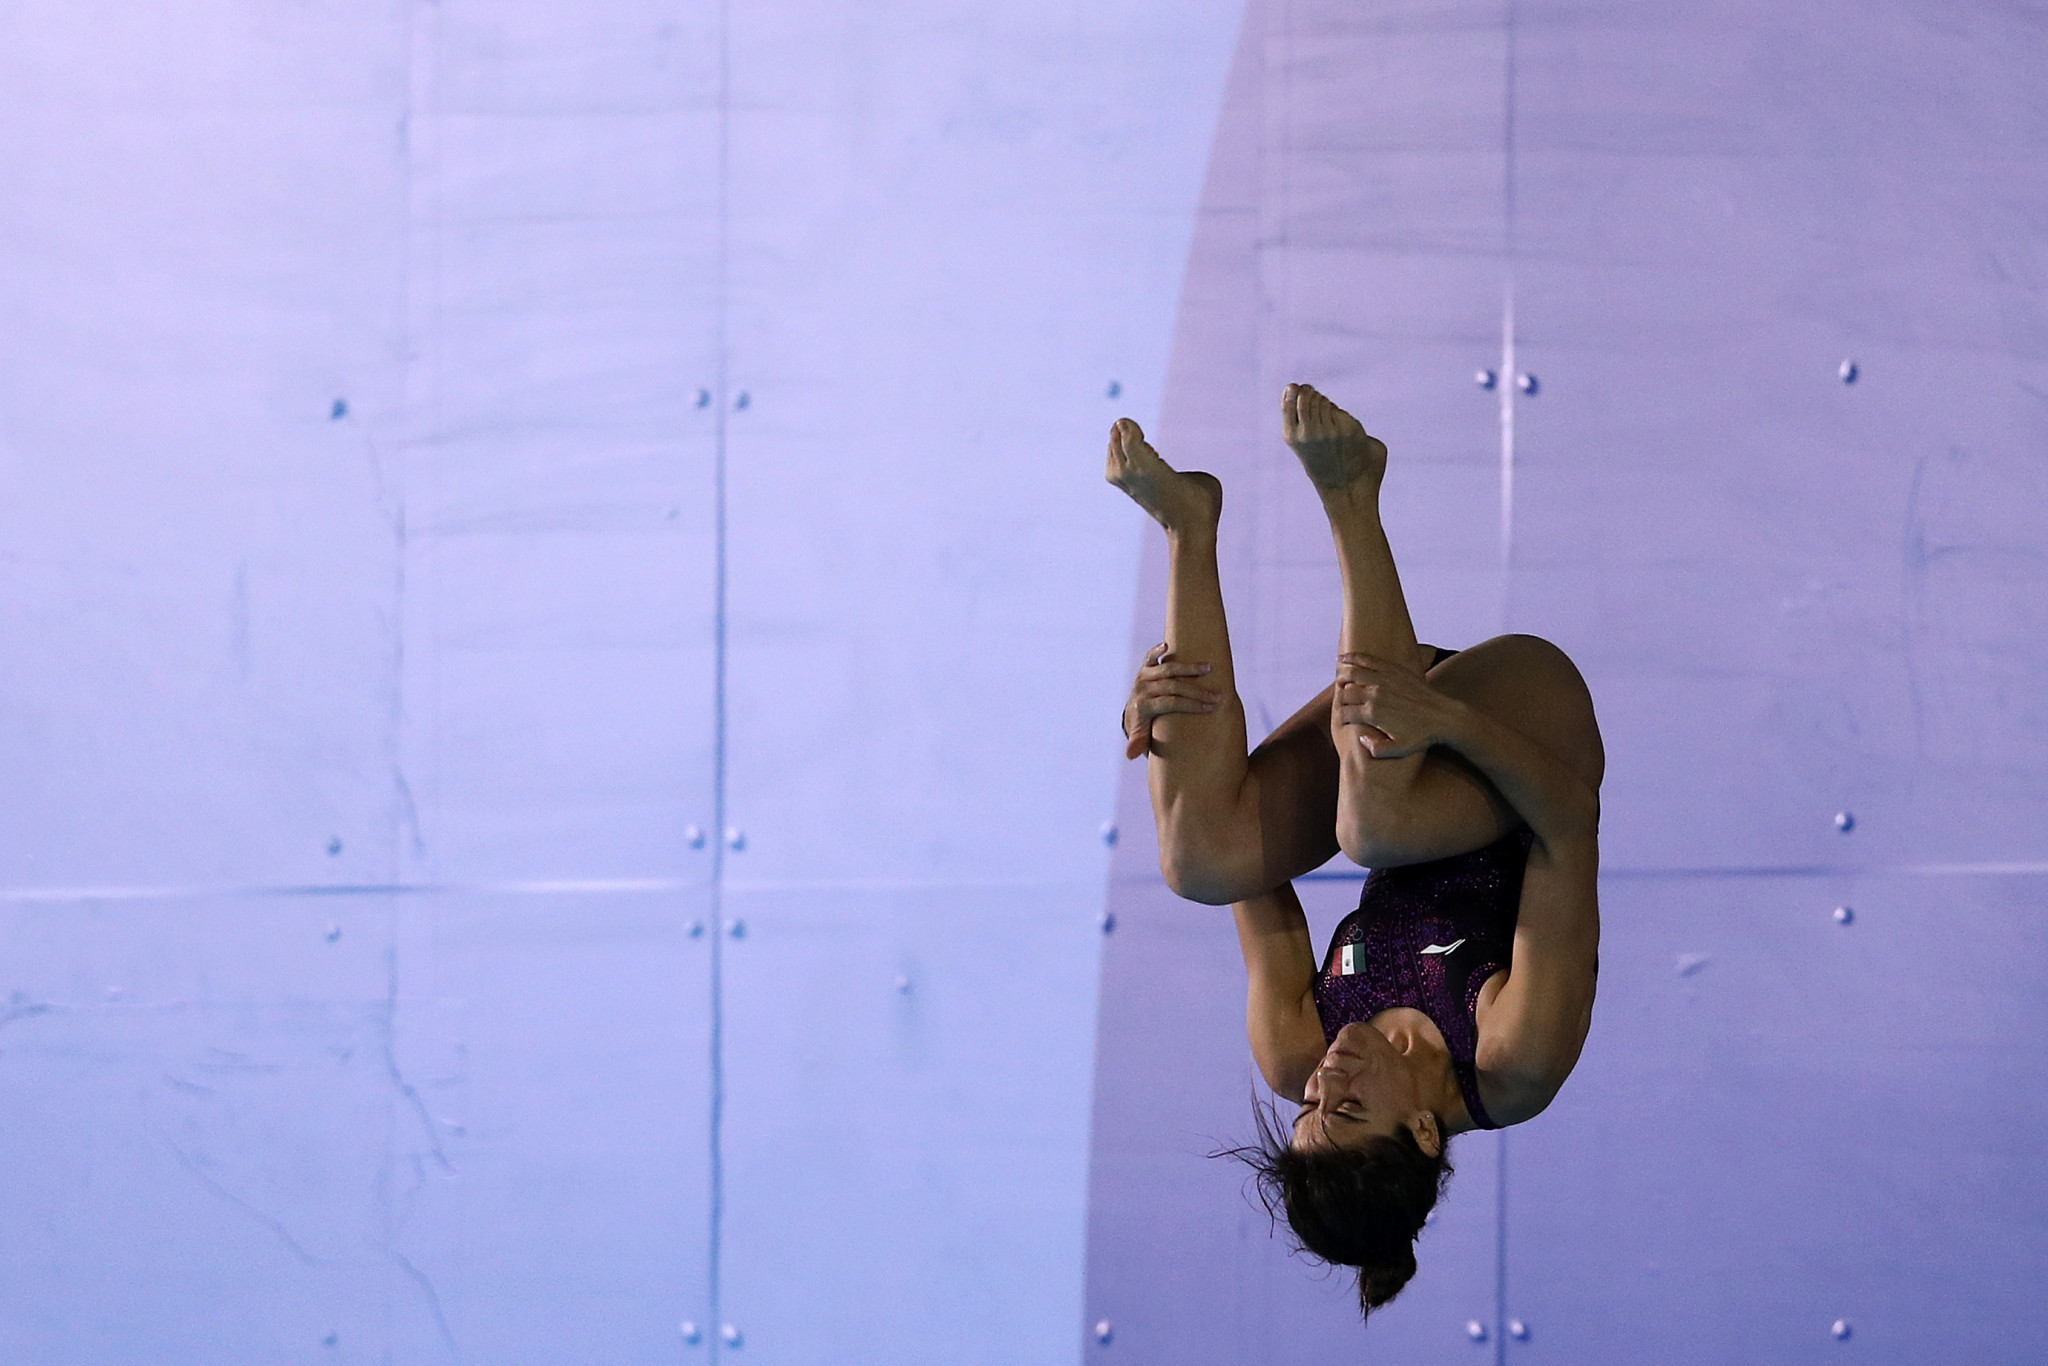 The women's 10m platform diving final saw a Tokyo 2020 berth on offer for the winner ©Getty Images